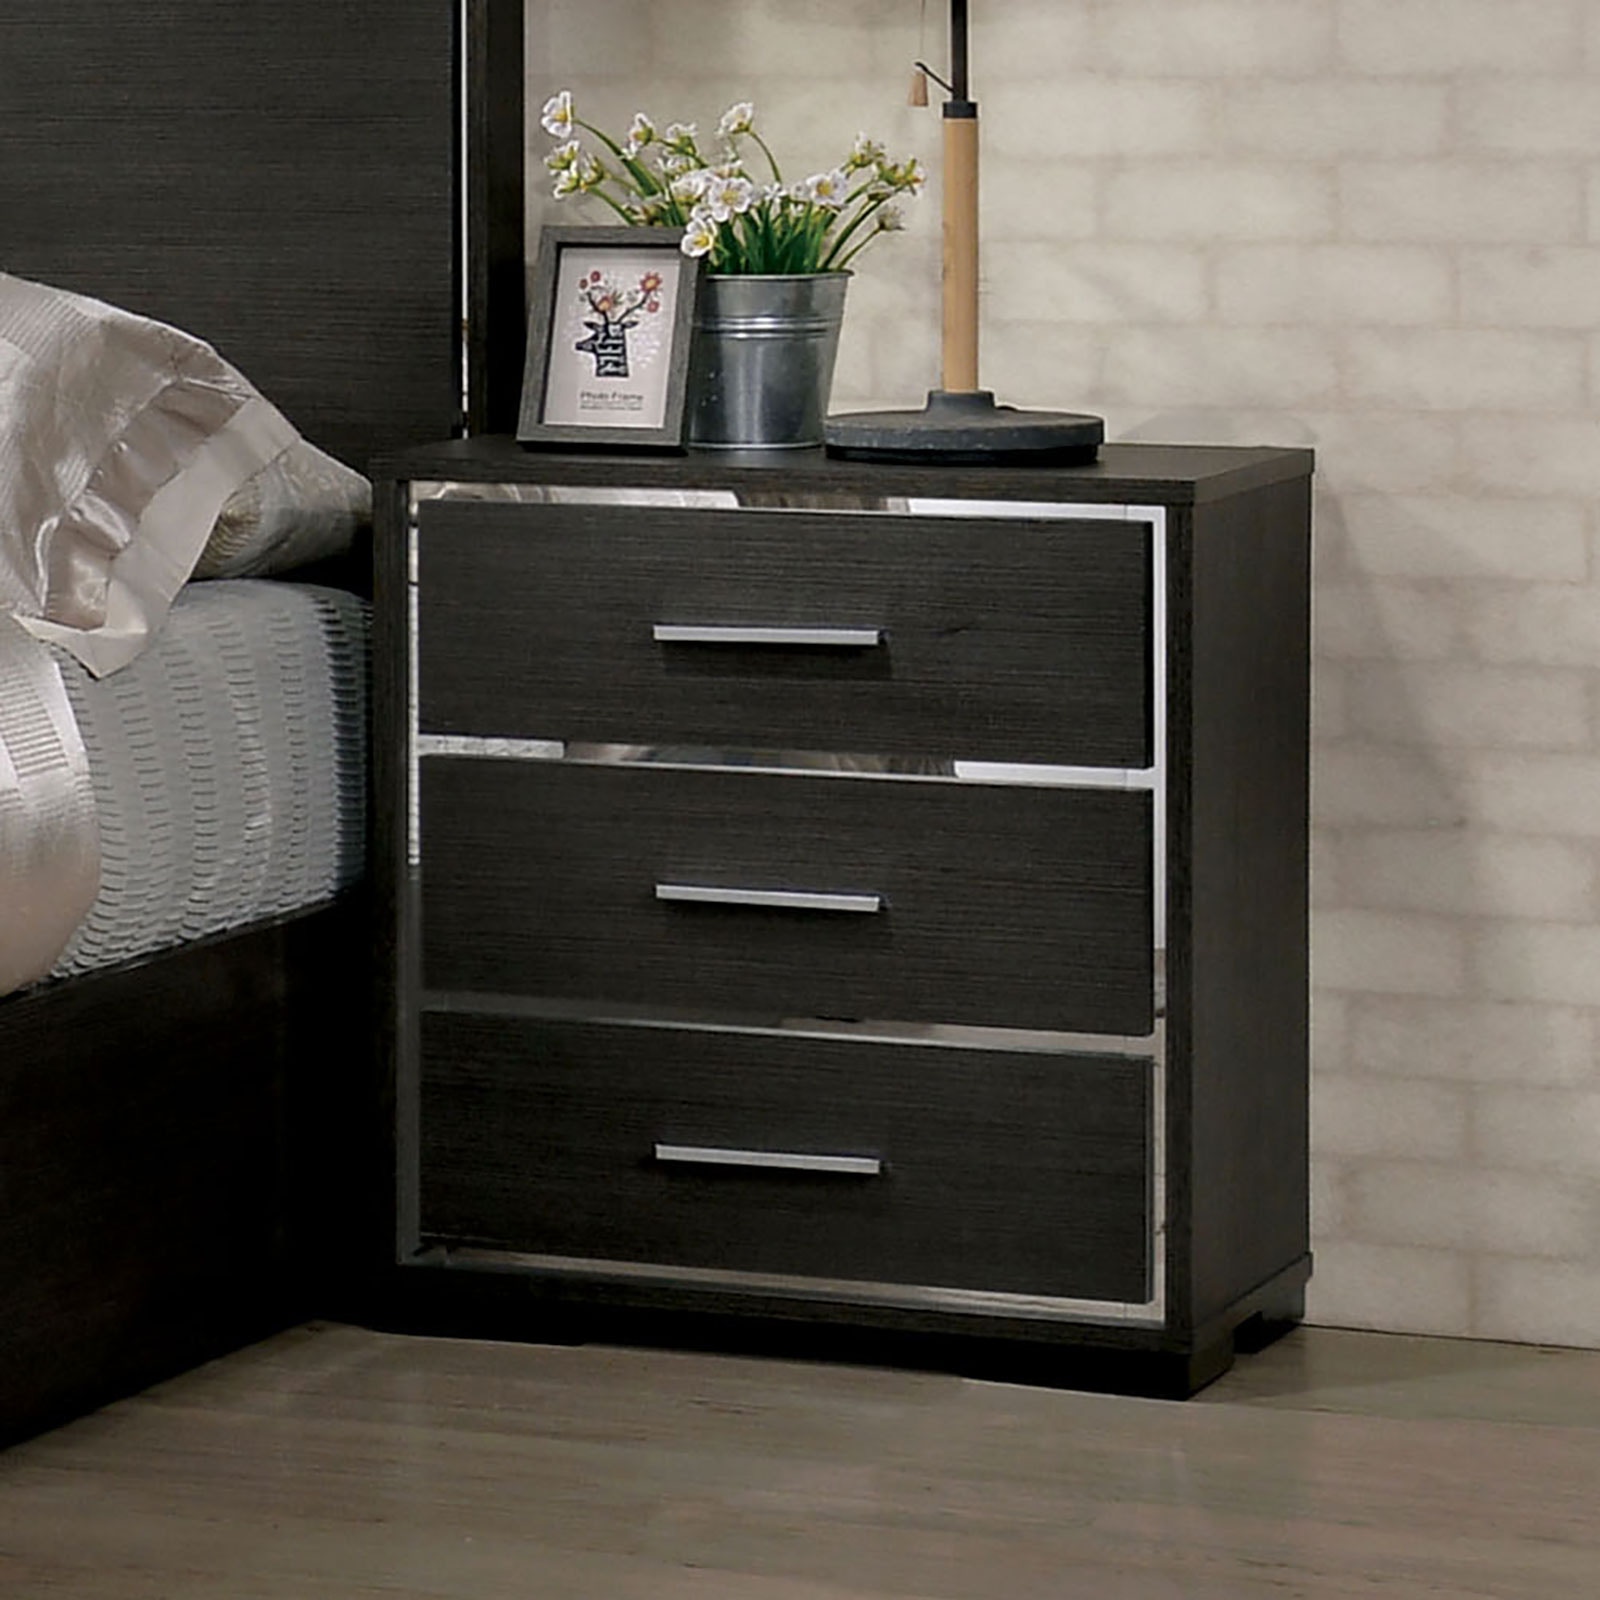 camryn youth furniture